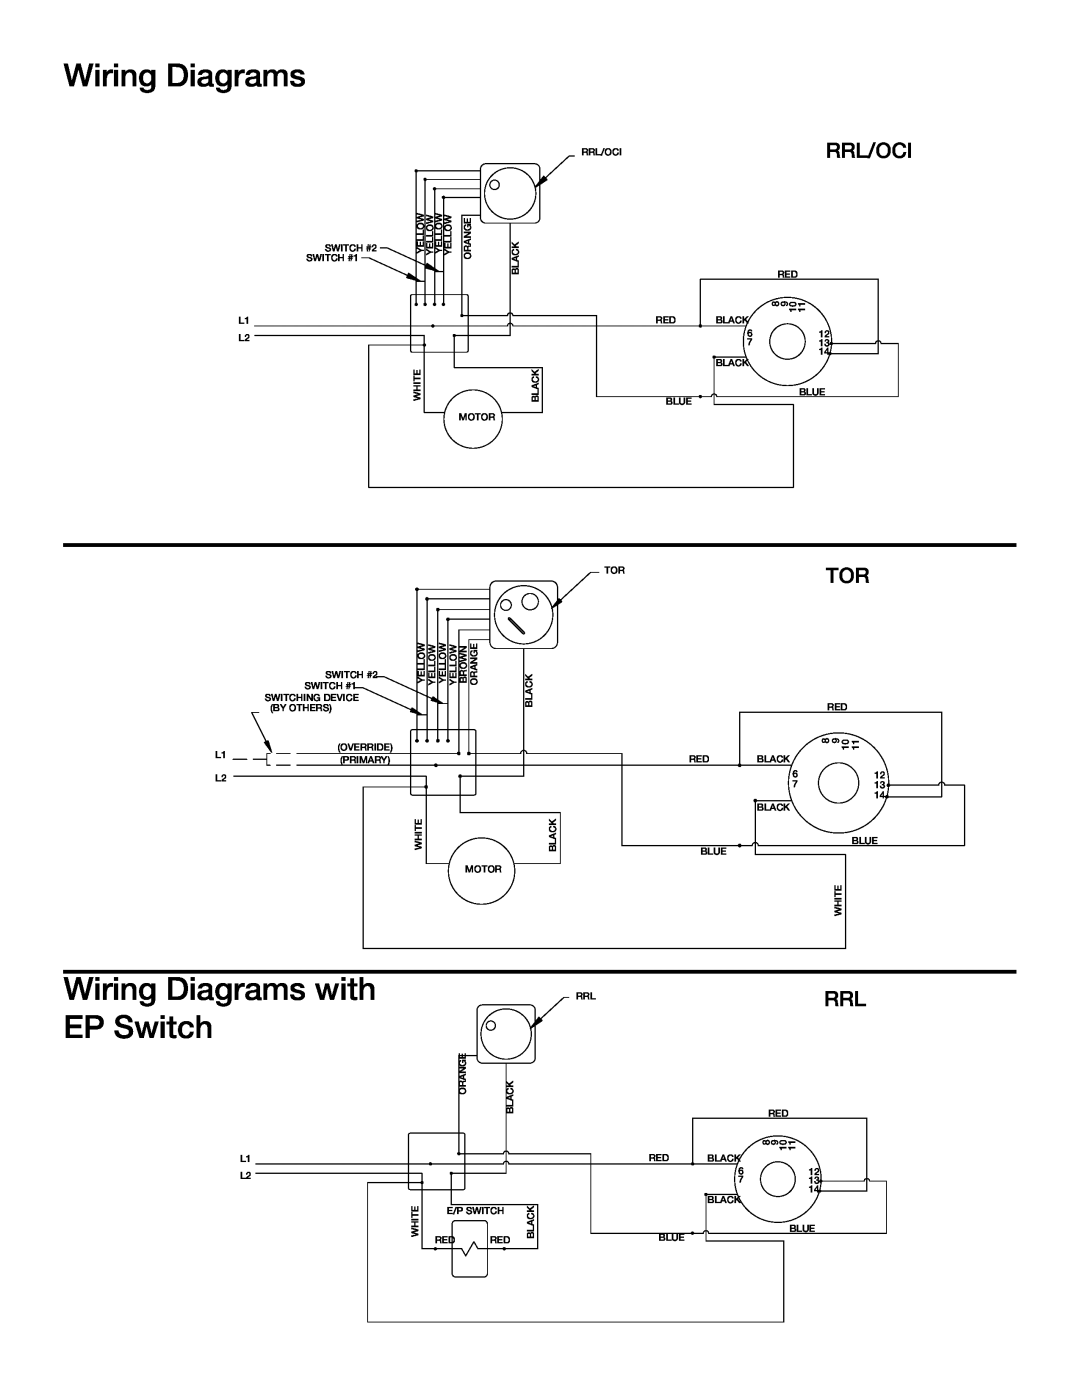 Greenheck Fan No Flow Duct Smoke Detector specifications Wiring Diagrams with EP Switch, Rrl/Oci 